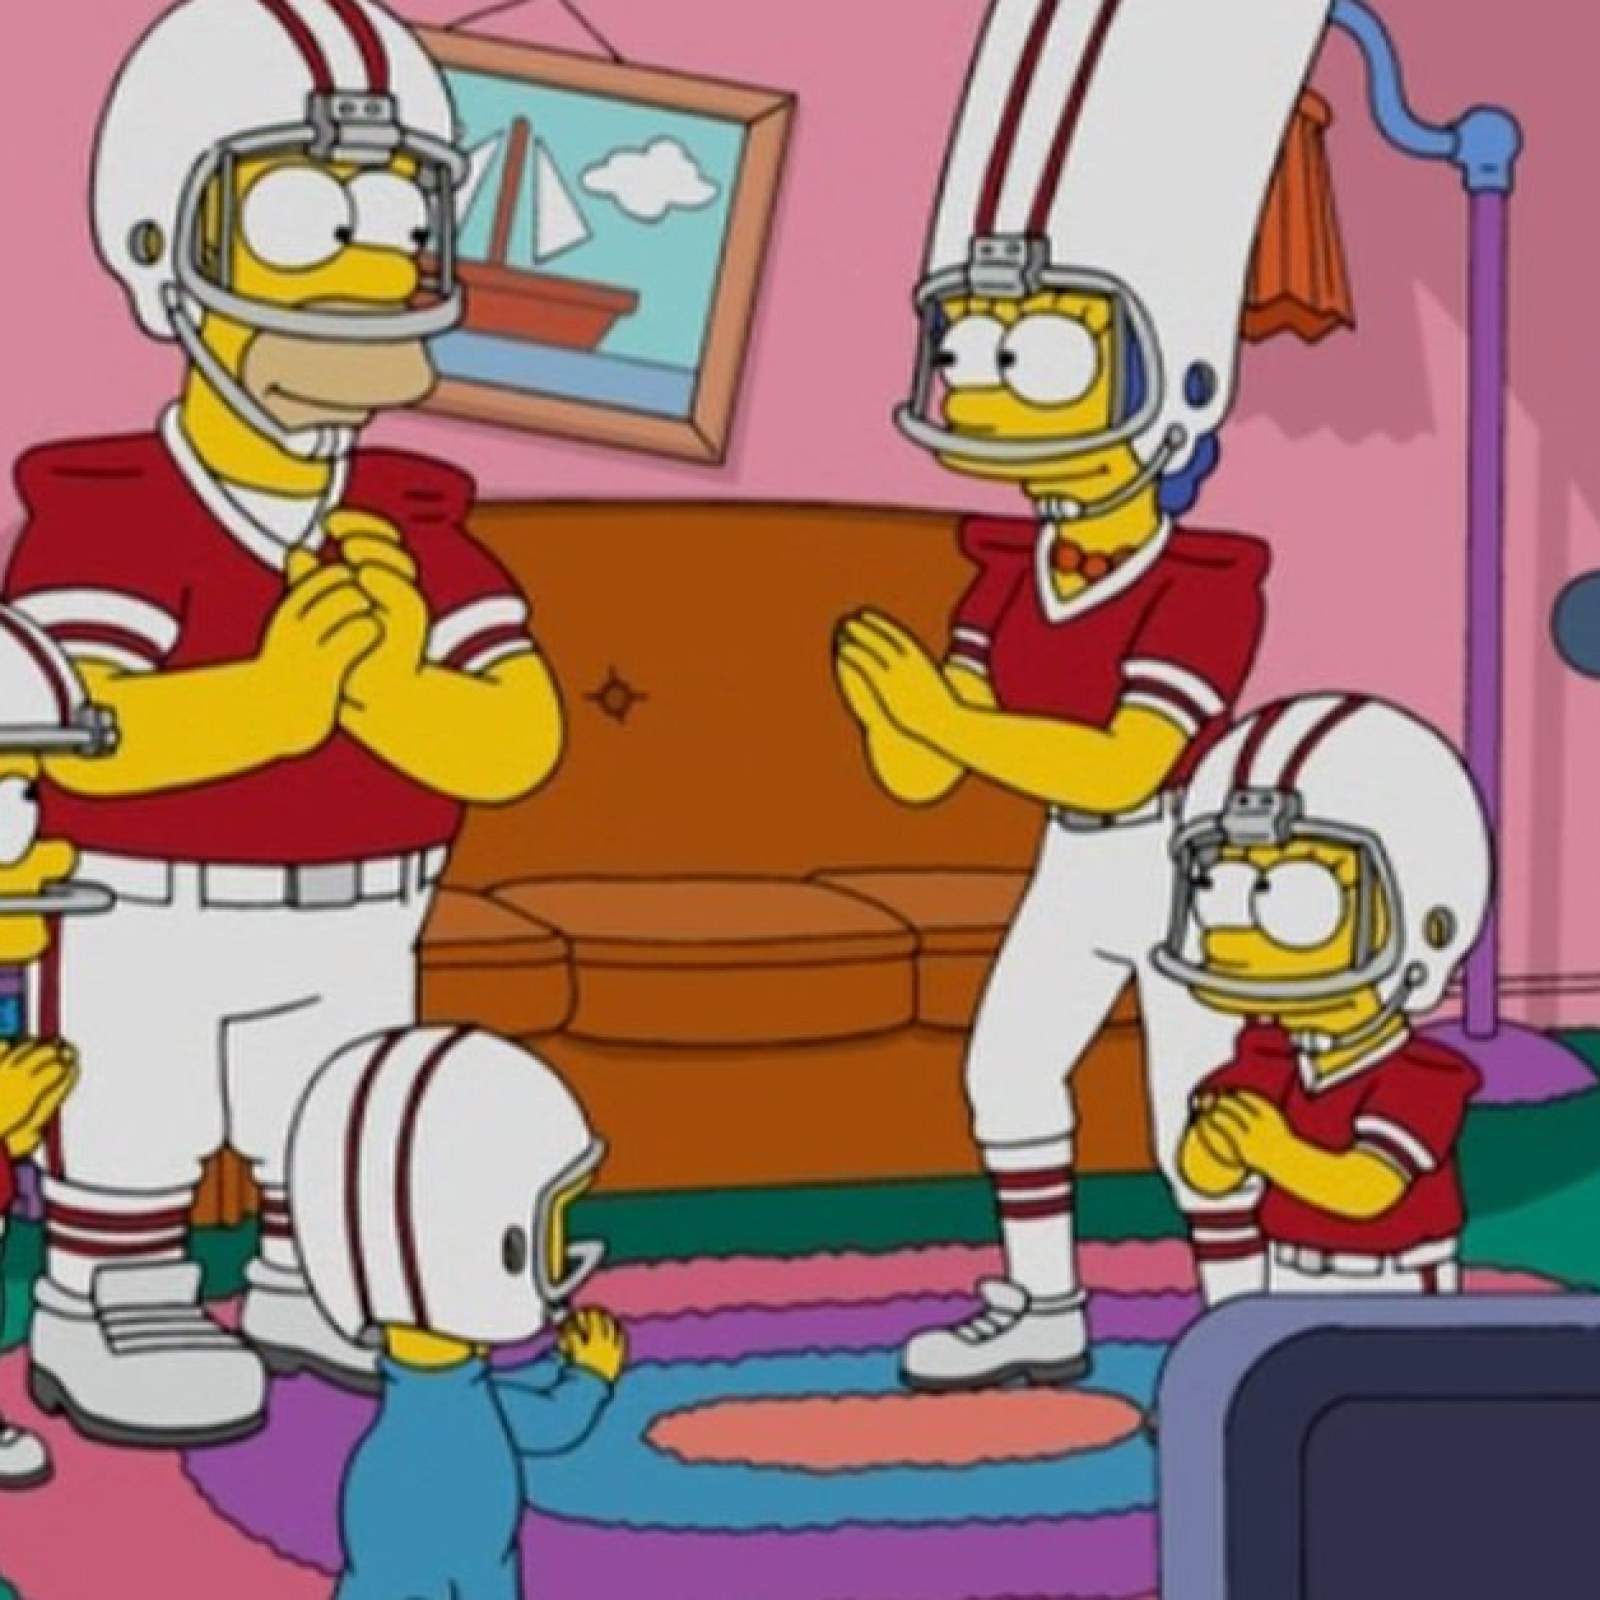 No, 'The Simpsons' Did Not Predict the 2022 Super Bowl